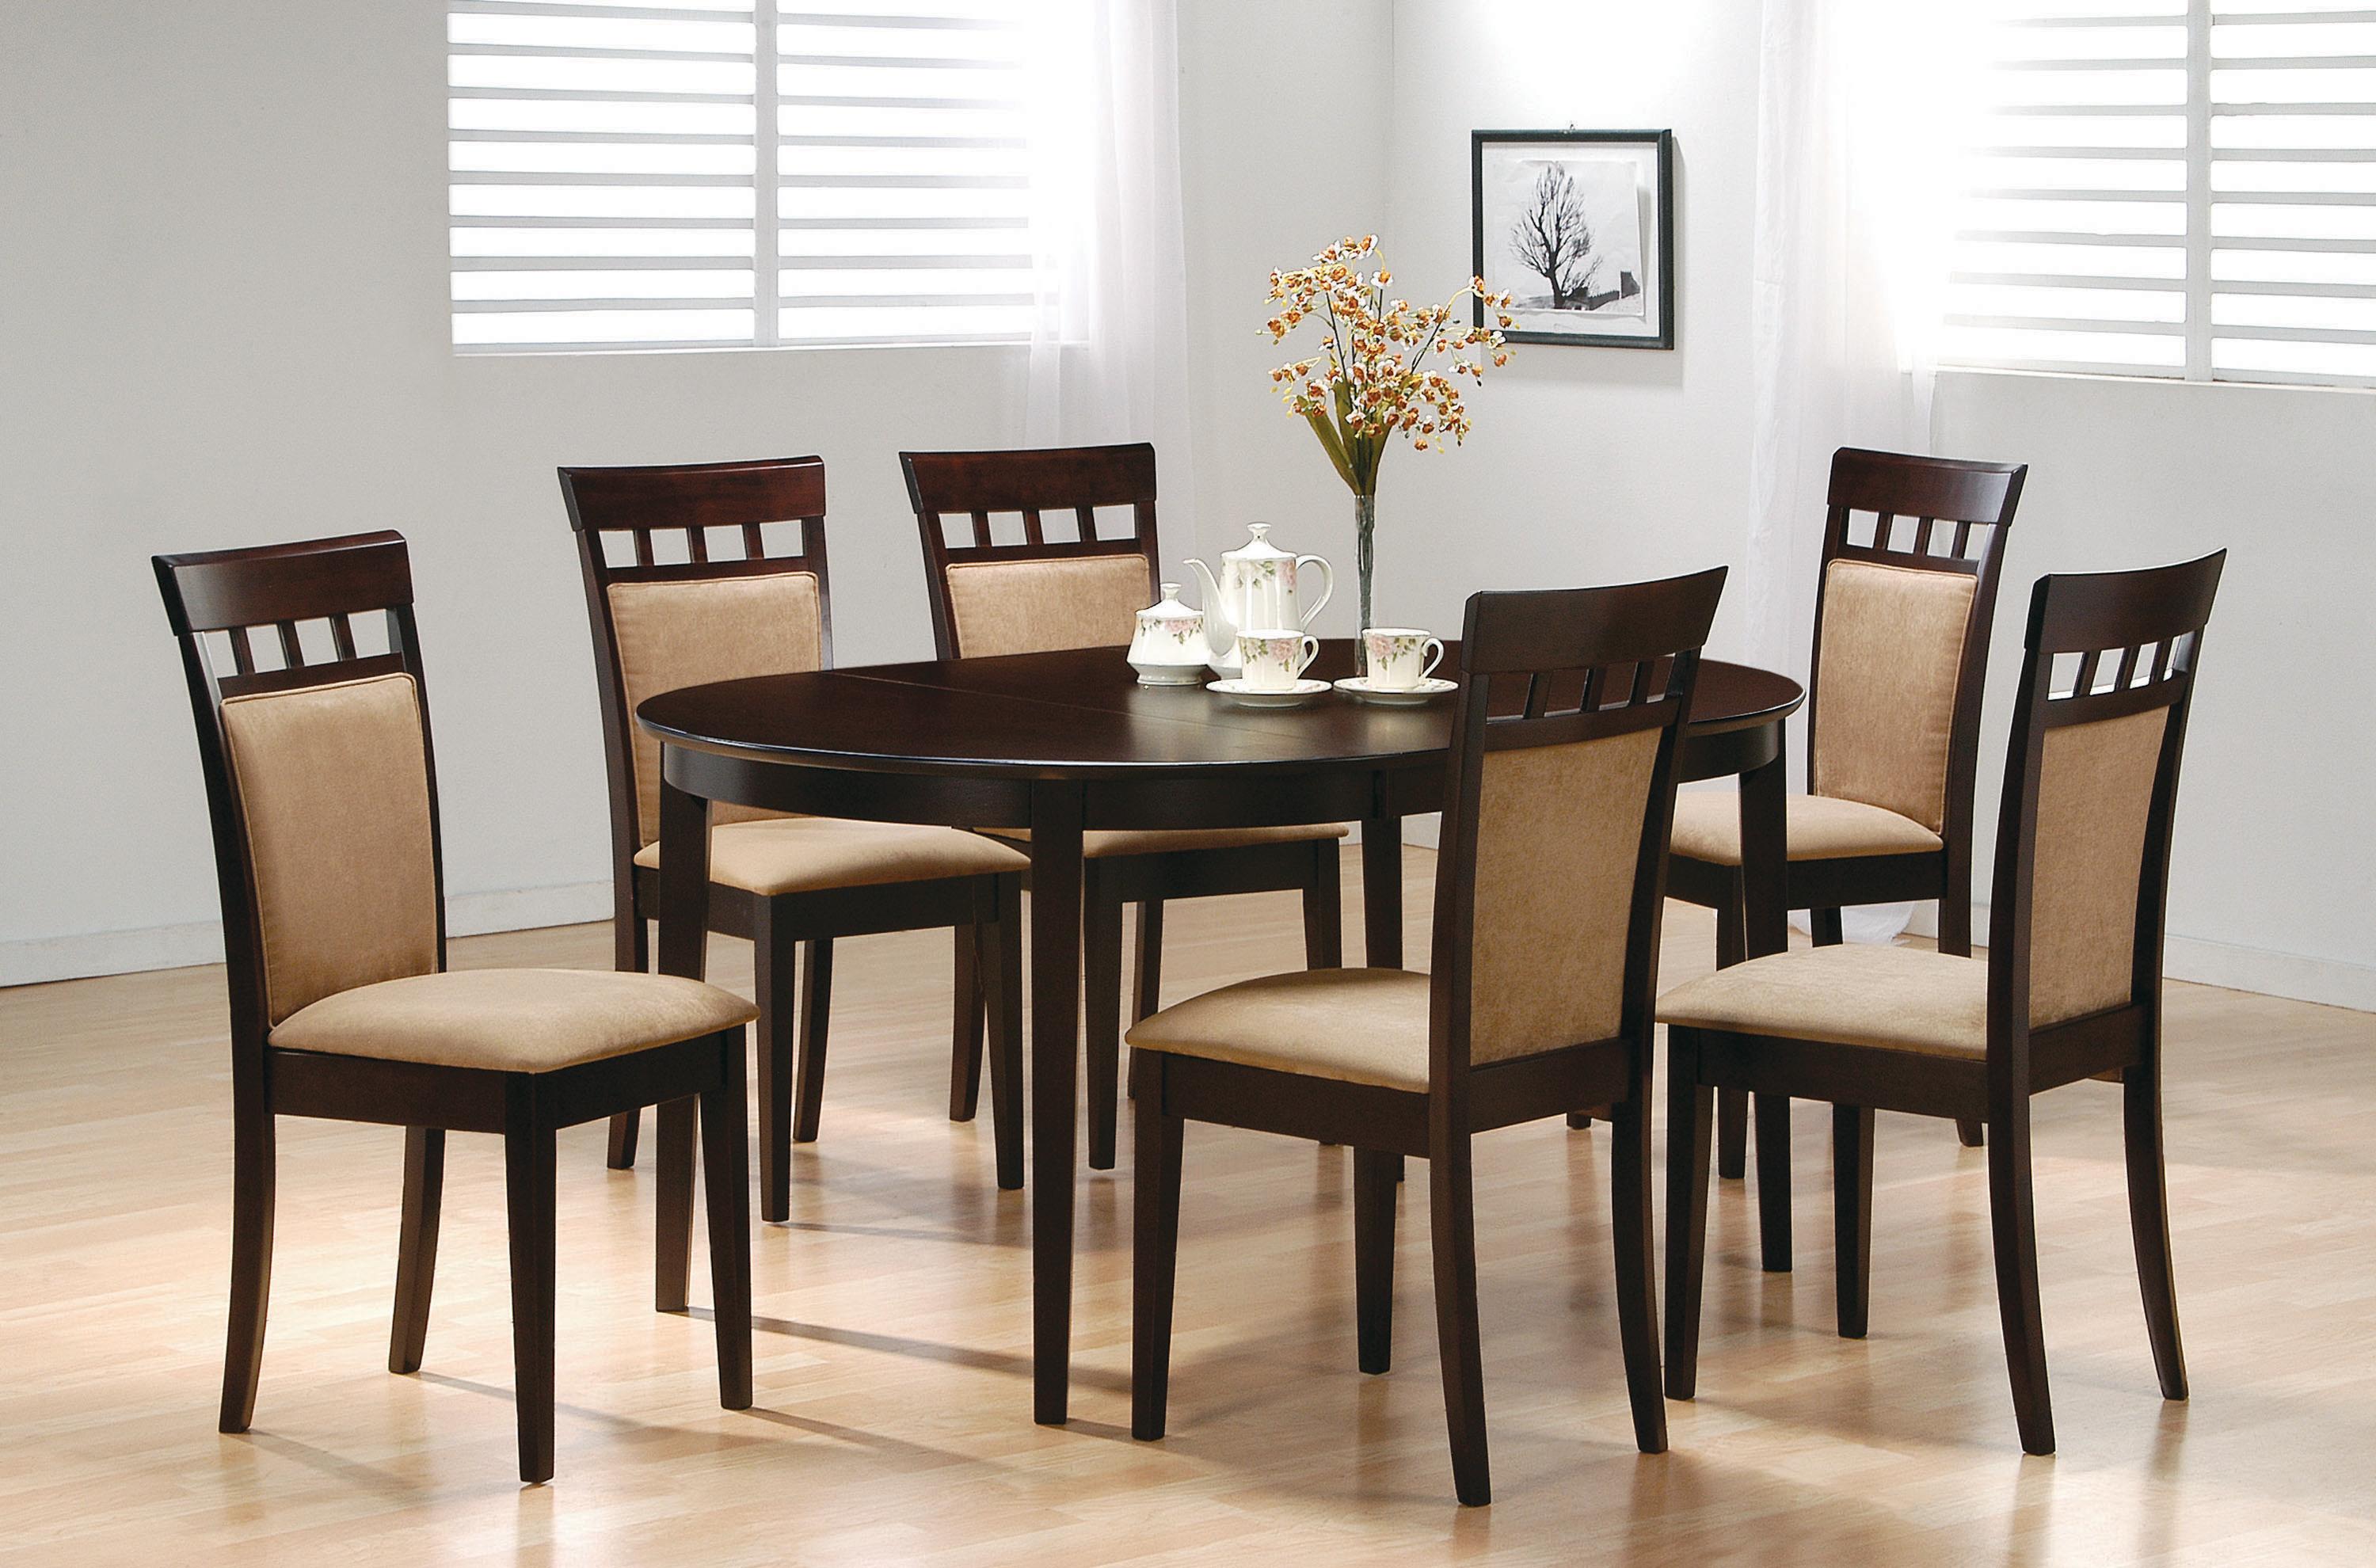 Transitional Dining Room Set 100770*73-S5 Gabriel 100770*73-S5 in Cappuccino Microfiber